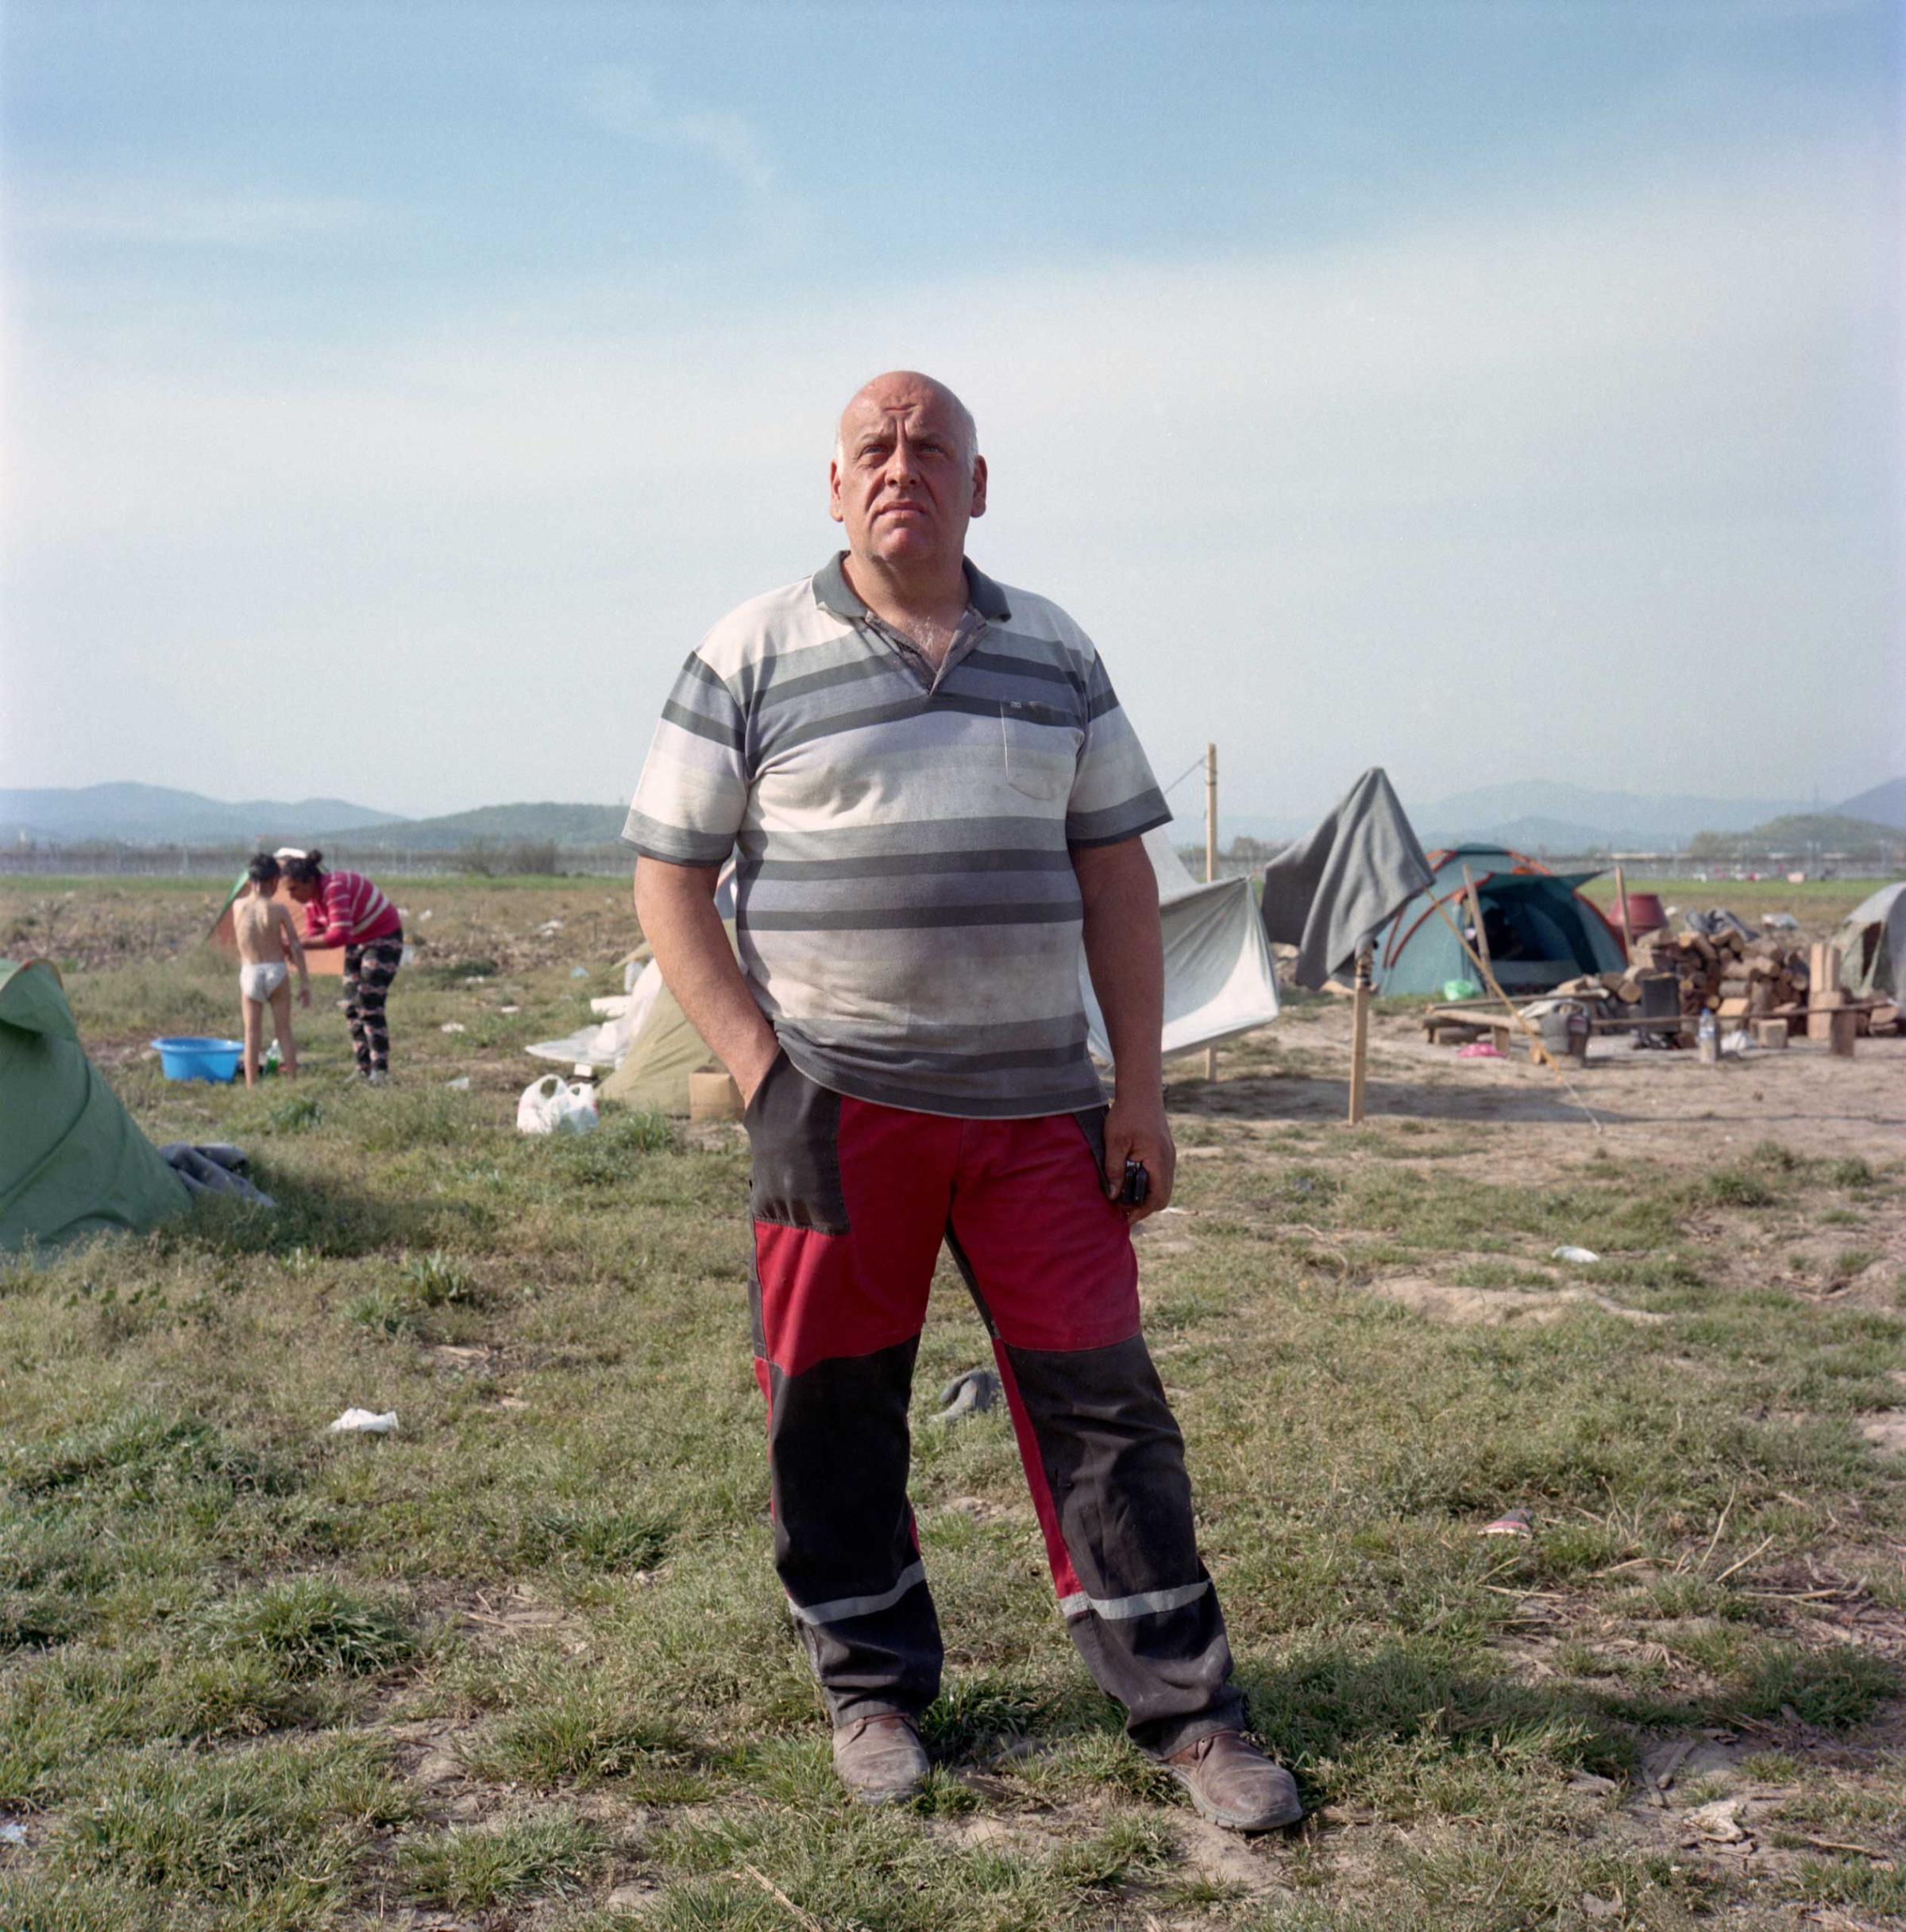 Lazarous Oulis, livestock farmer from Idomeni stands in a field where he planted crops to grow animal feed. Since September 2016, refugee tents have spread on nearly 250 acres of Lazaros Oulis'es land, all the way to the border with Macedonia, preventing him from working on his harvest and resulting in losses of Euro 20,000 for which he claims he had not received any compensation. Idomeni, Greece. April, 2016